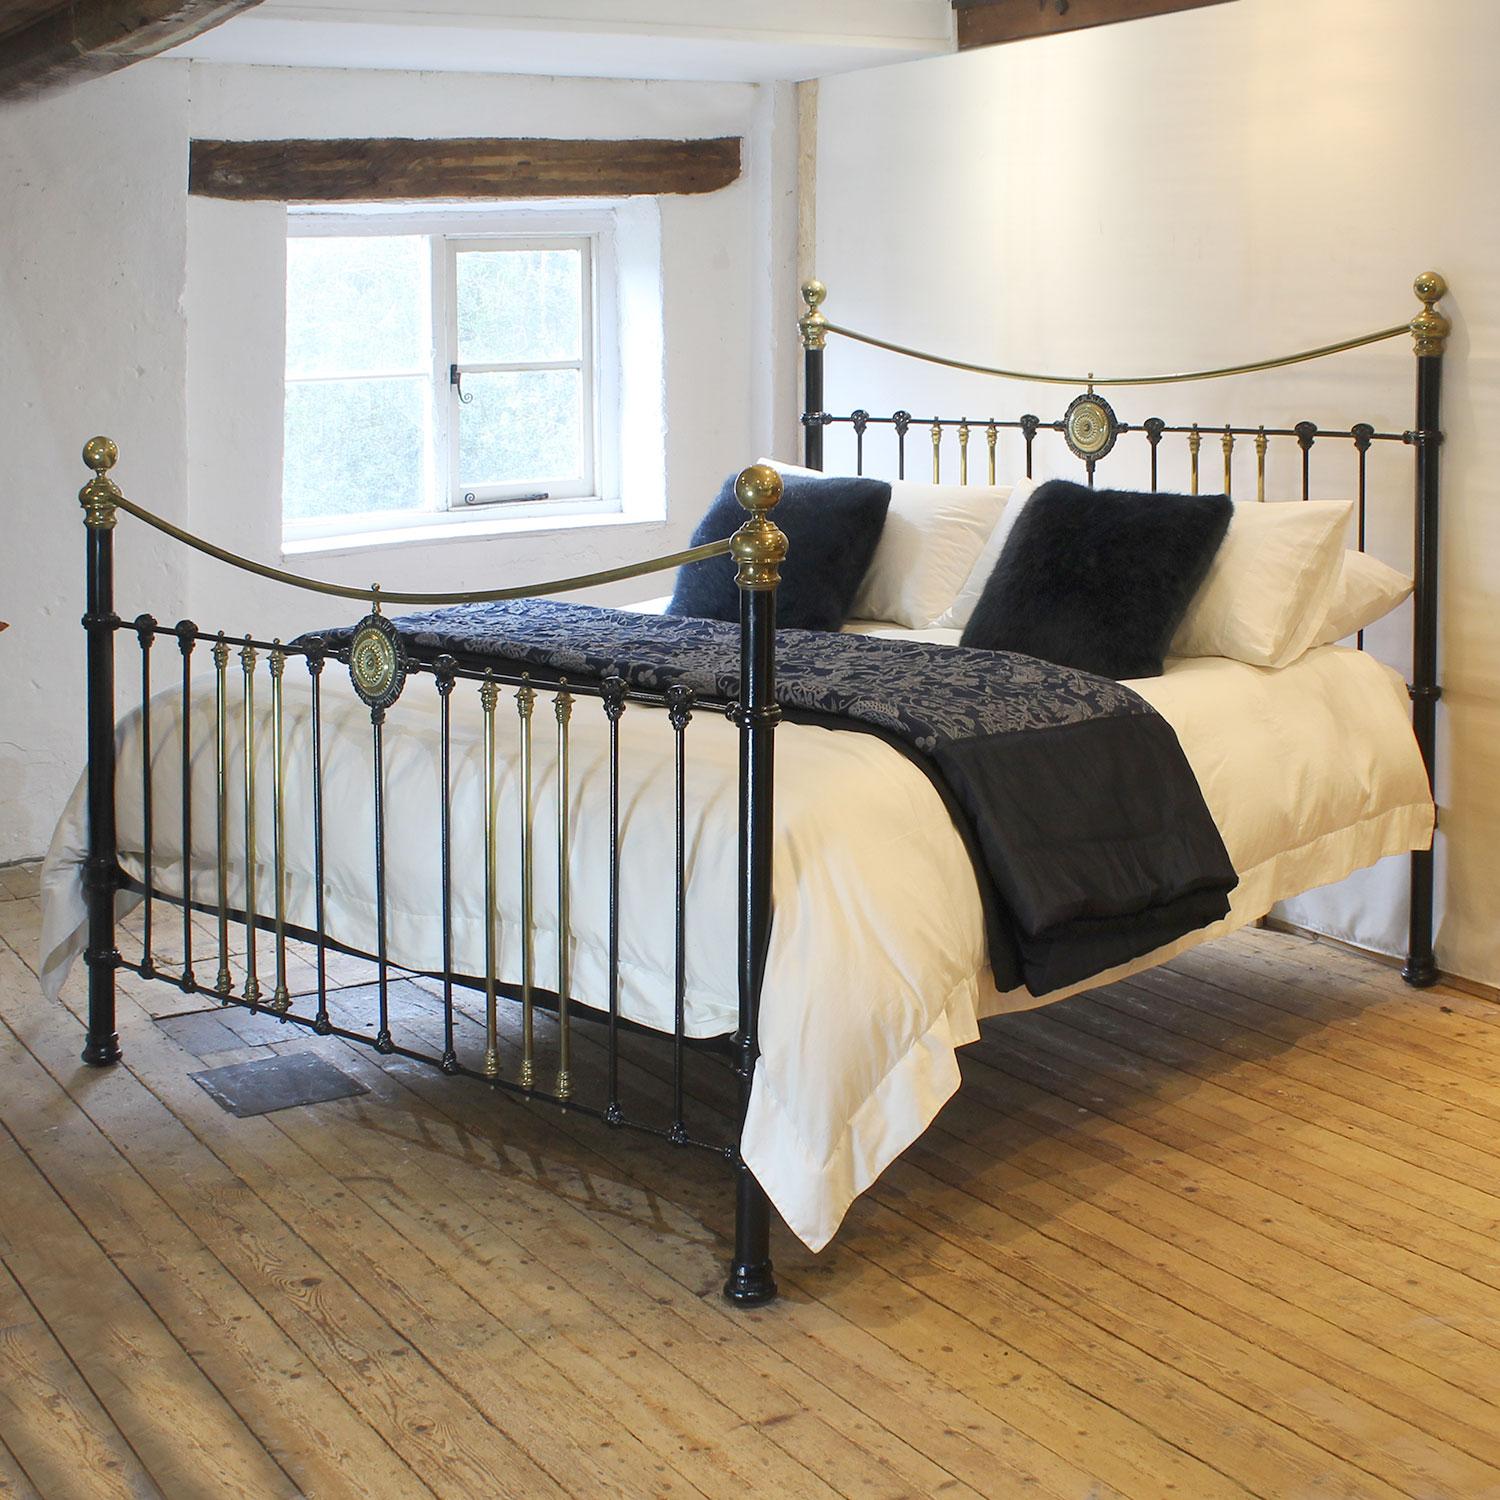 An attractive 6ft wide (72 inches) brass and iron bedstead finished in black with central brass rosette decoration and curved brass top rail, adapted and extended from an original Victorian frame, circa 1895. The brass work has acquired a tarnished